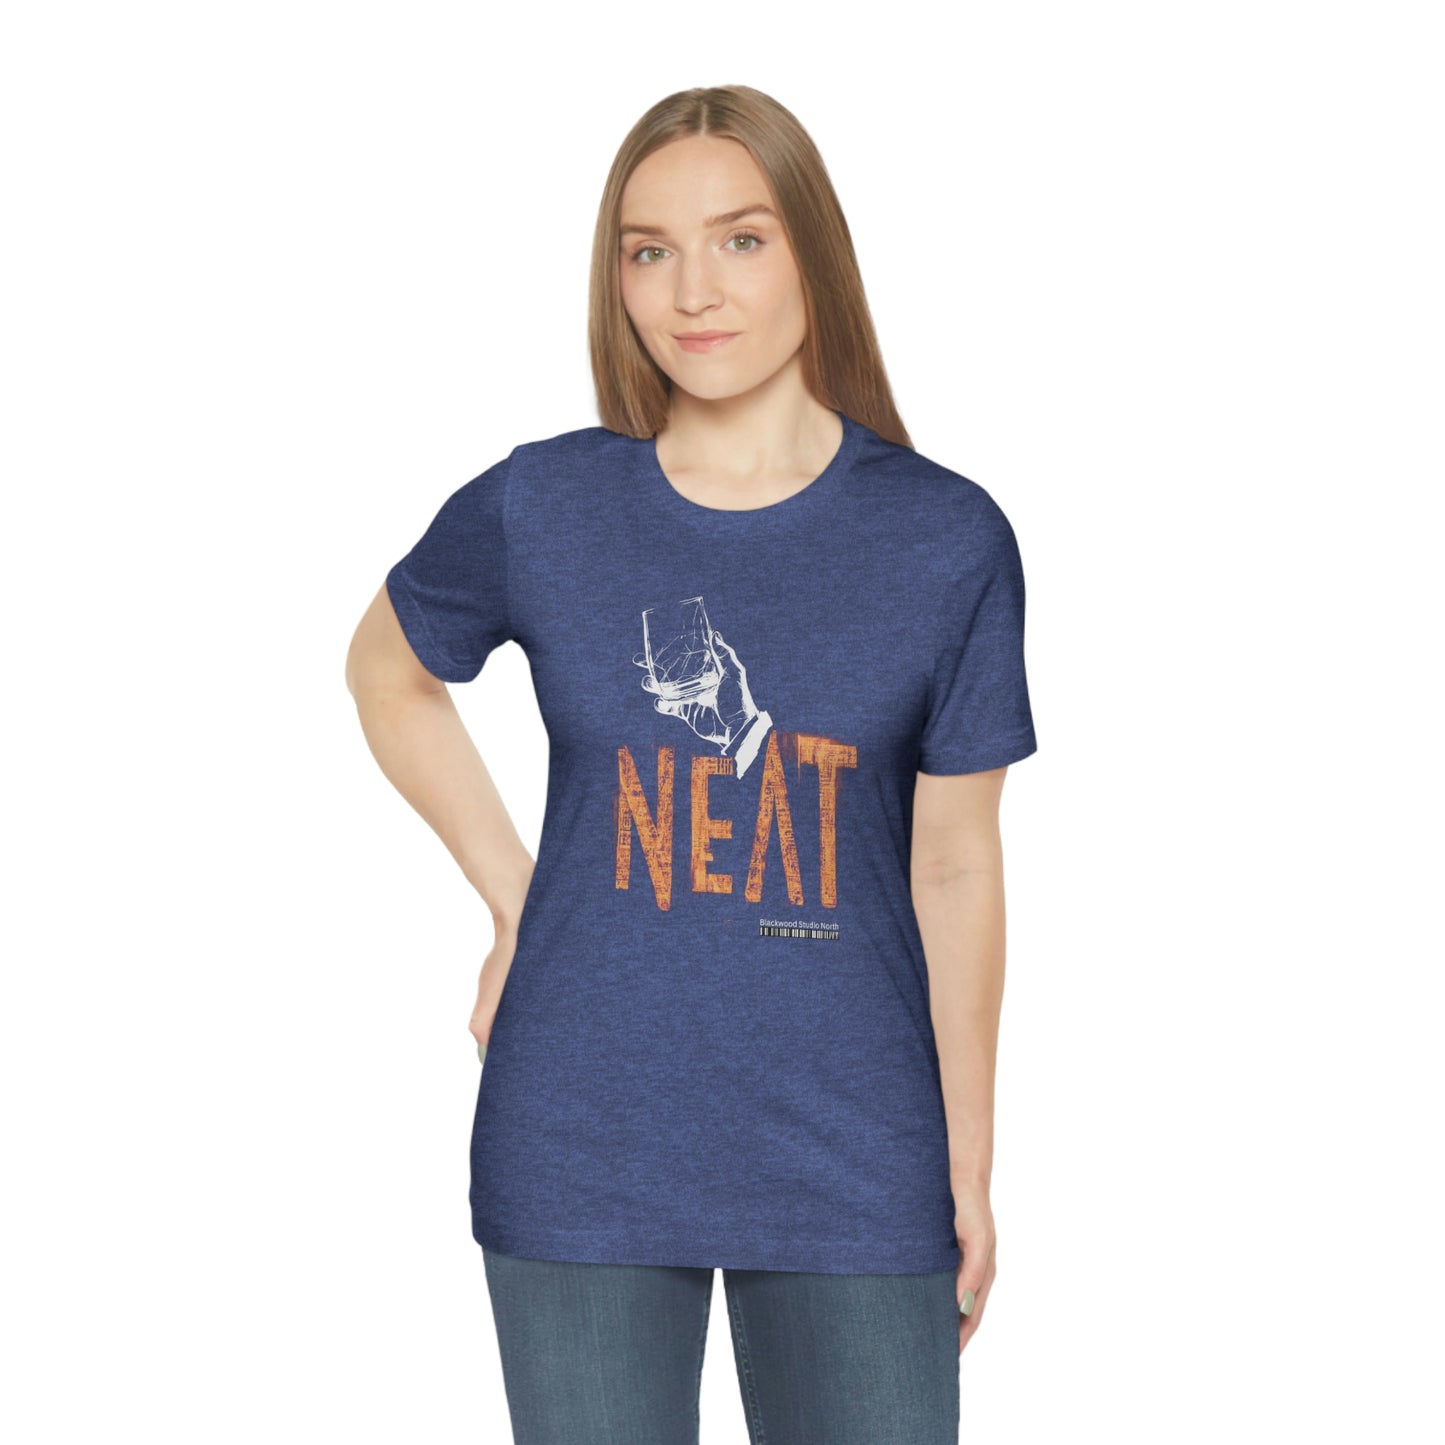 "Neat" with Hand Holding Bourbon Glass Graphic Apparel | Unisex Jersey Short Sleeve T-shirt